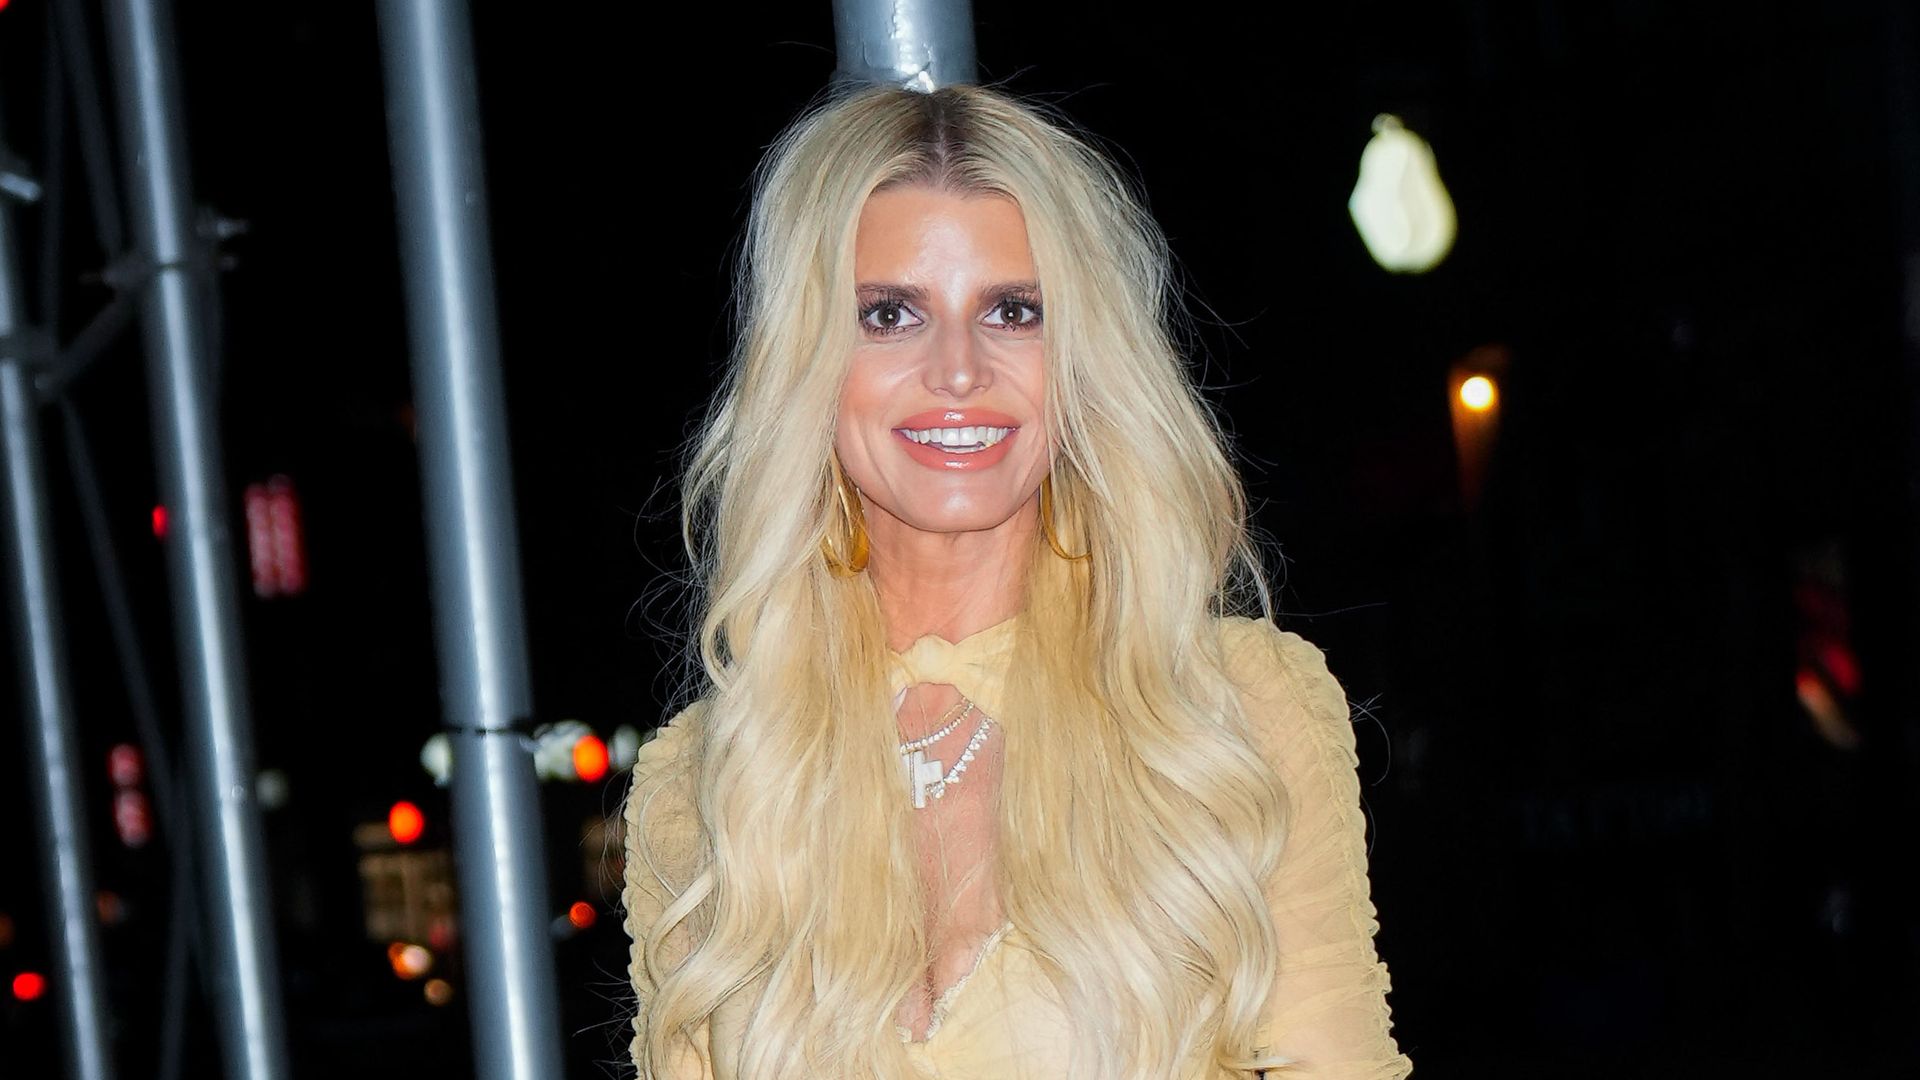 Jessica Simpson Shared the Sweetest Selfie With Her Look-Alike Daughter  Birdie